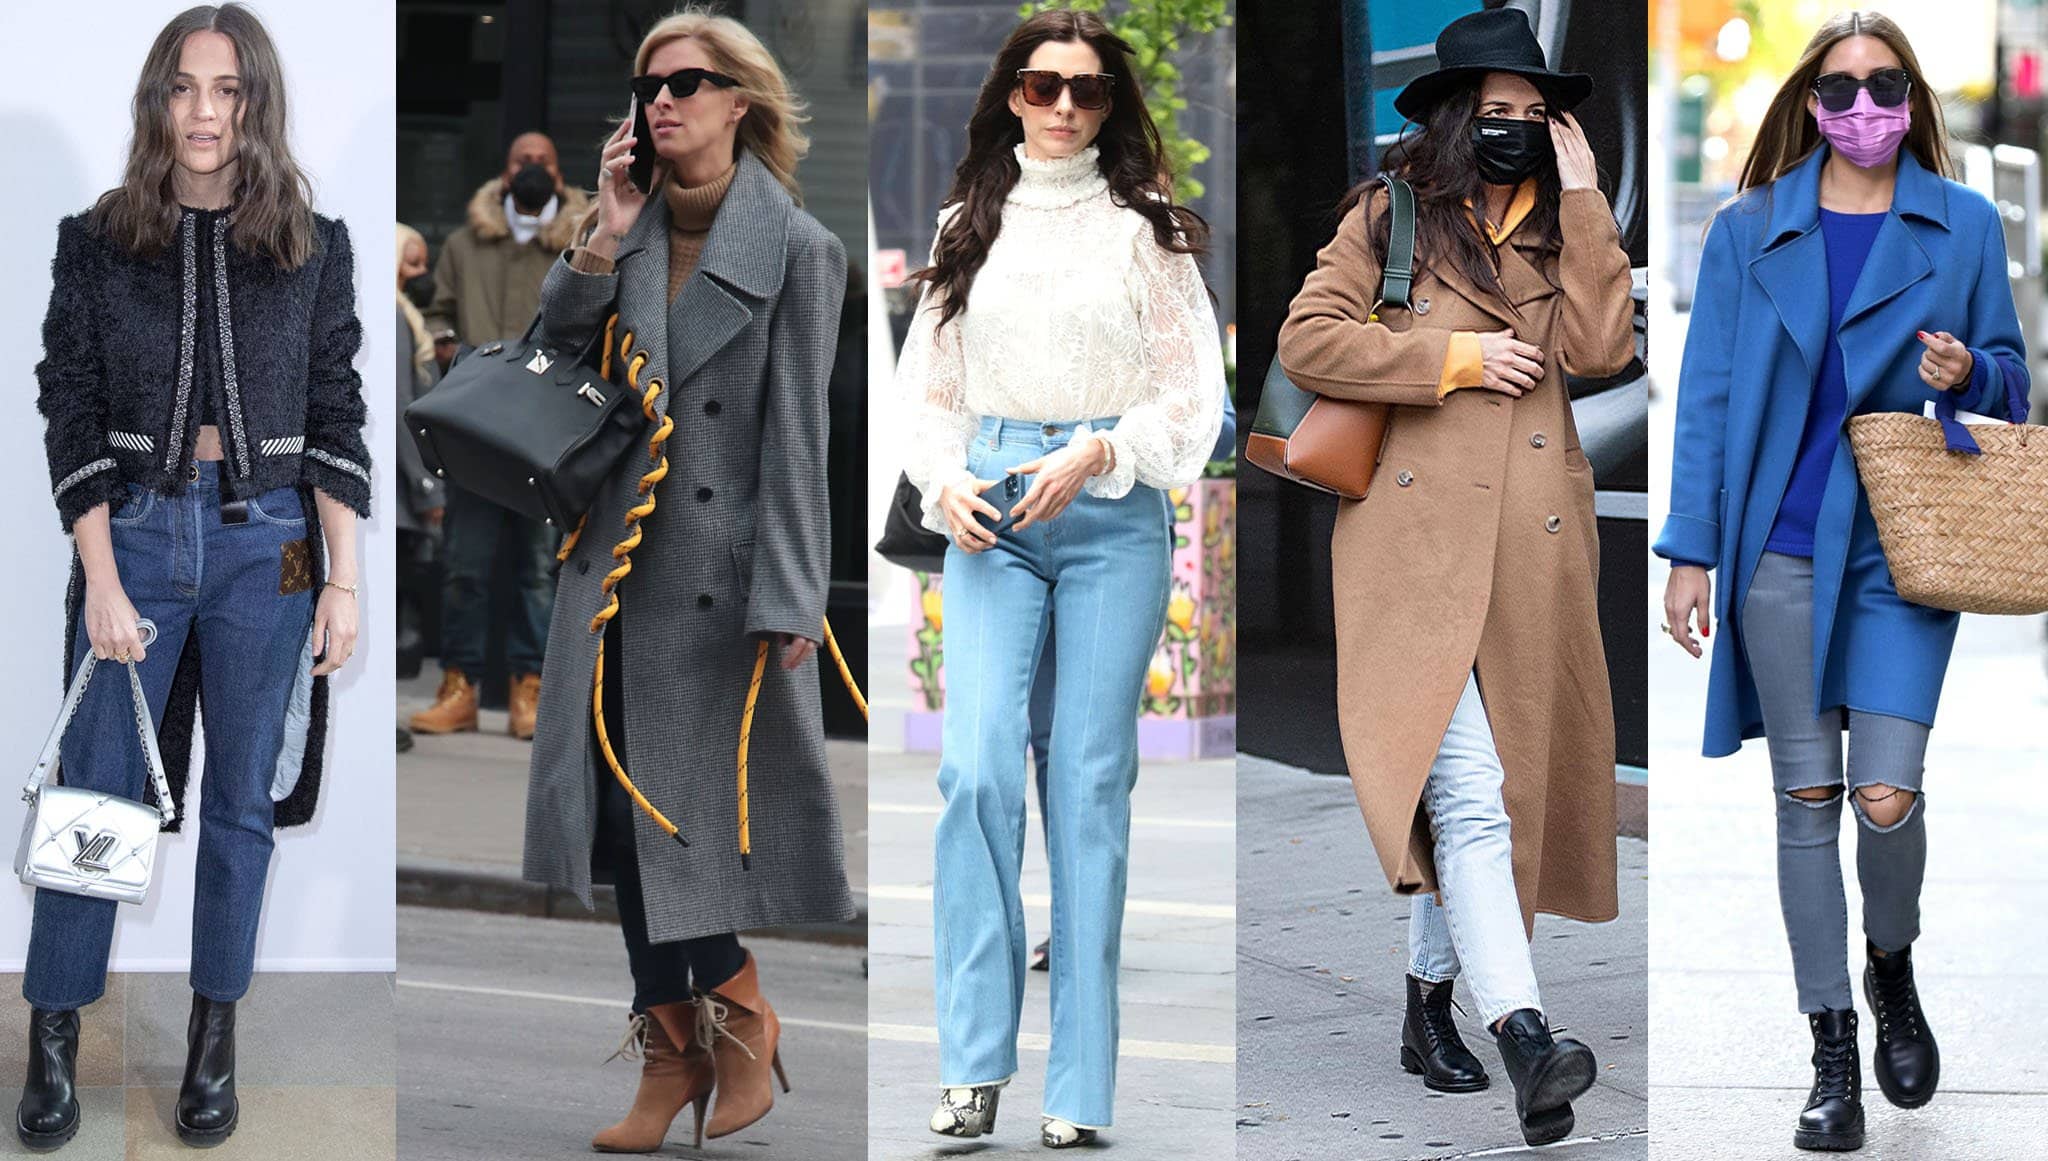 Alicia Vikander, Nicky Hilton, Anne Hathaway, Katie Holmes, and Olivia Palermo show how to wear jeans with ankle boots